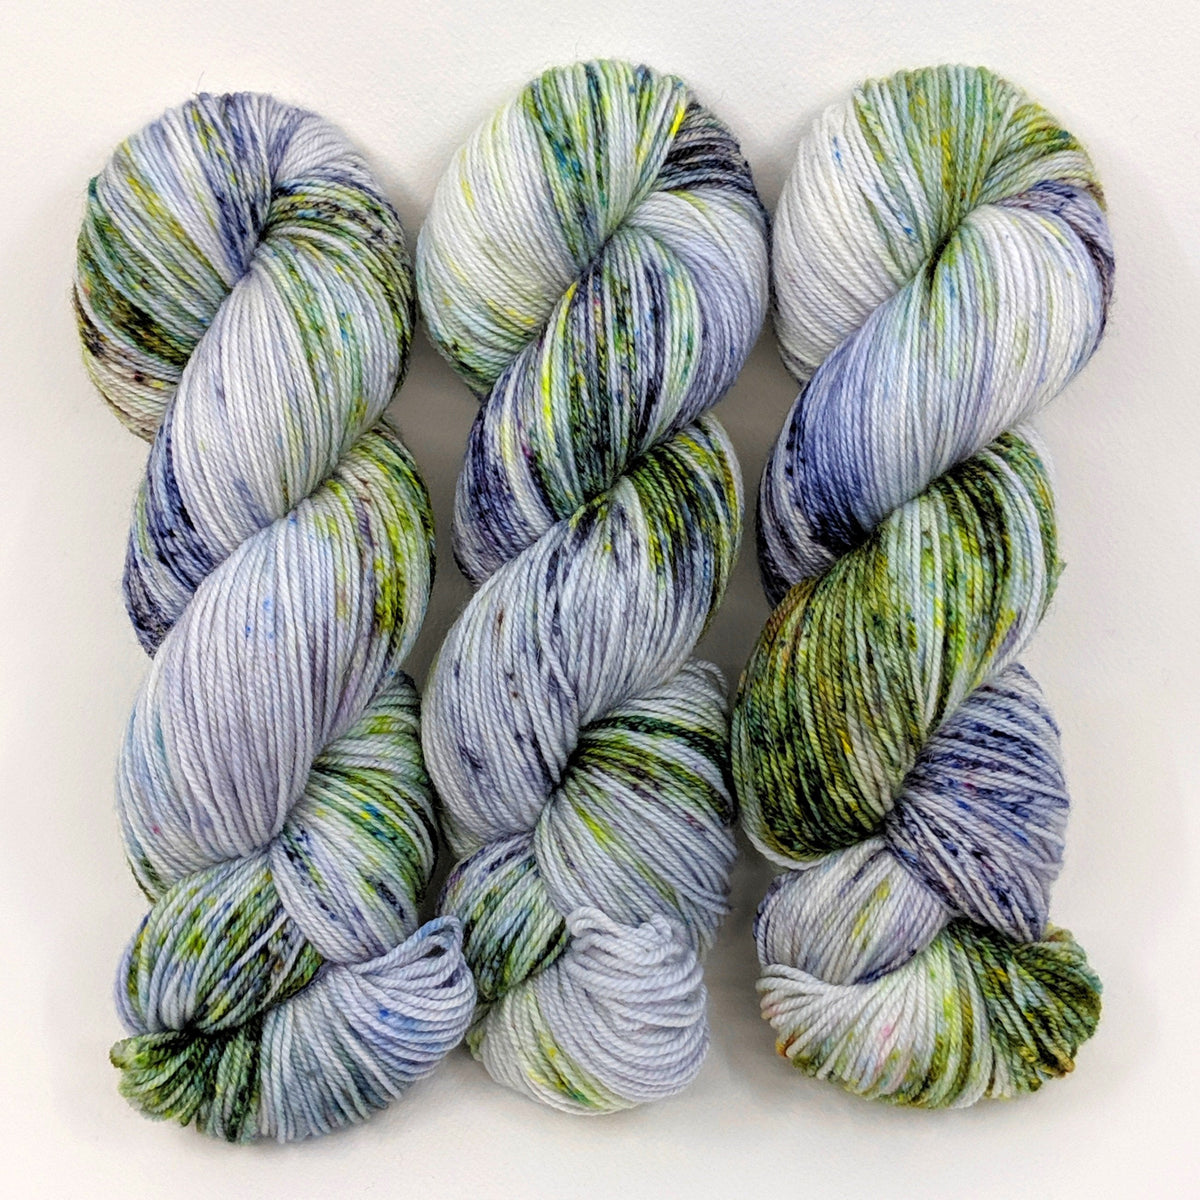 Rocky Mountain Snowfall - Merino DK / Light Worsted - Discontinued Colour